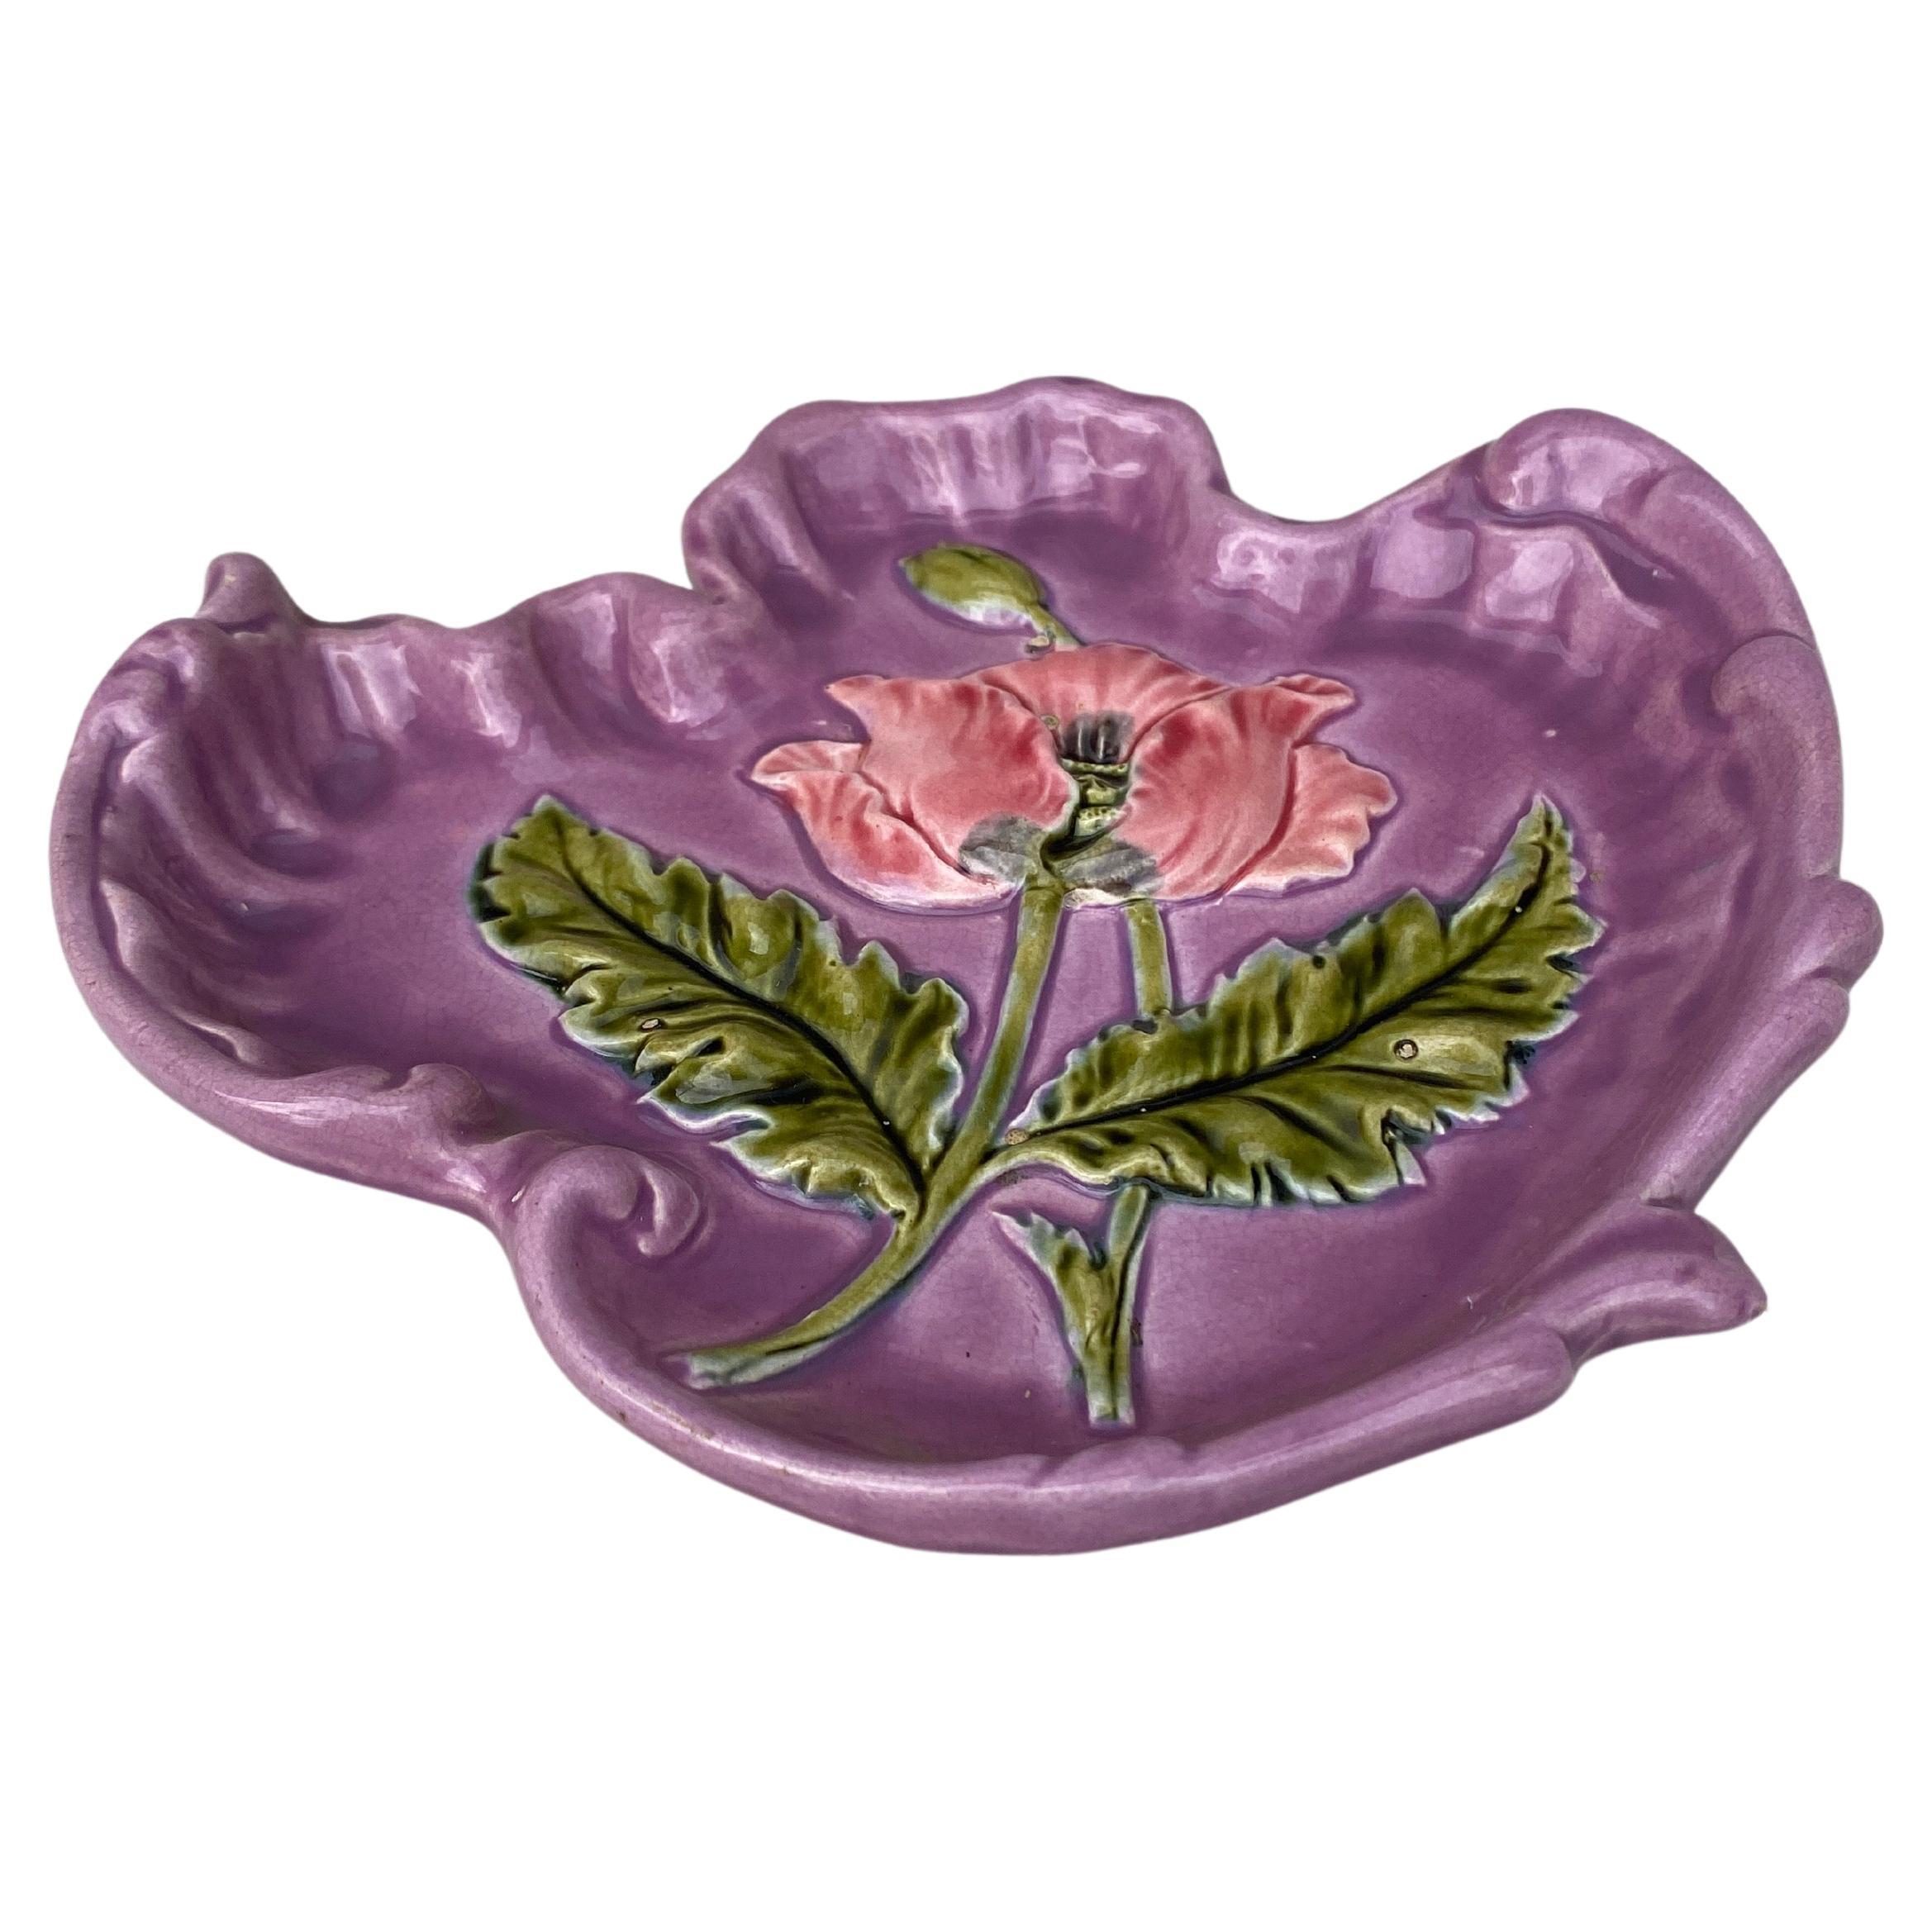 Rare French Majolica Pink Platter with poppies circa 1890.